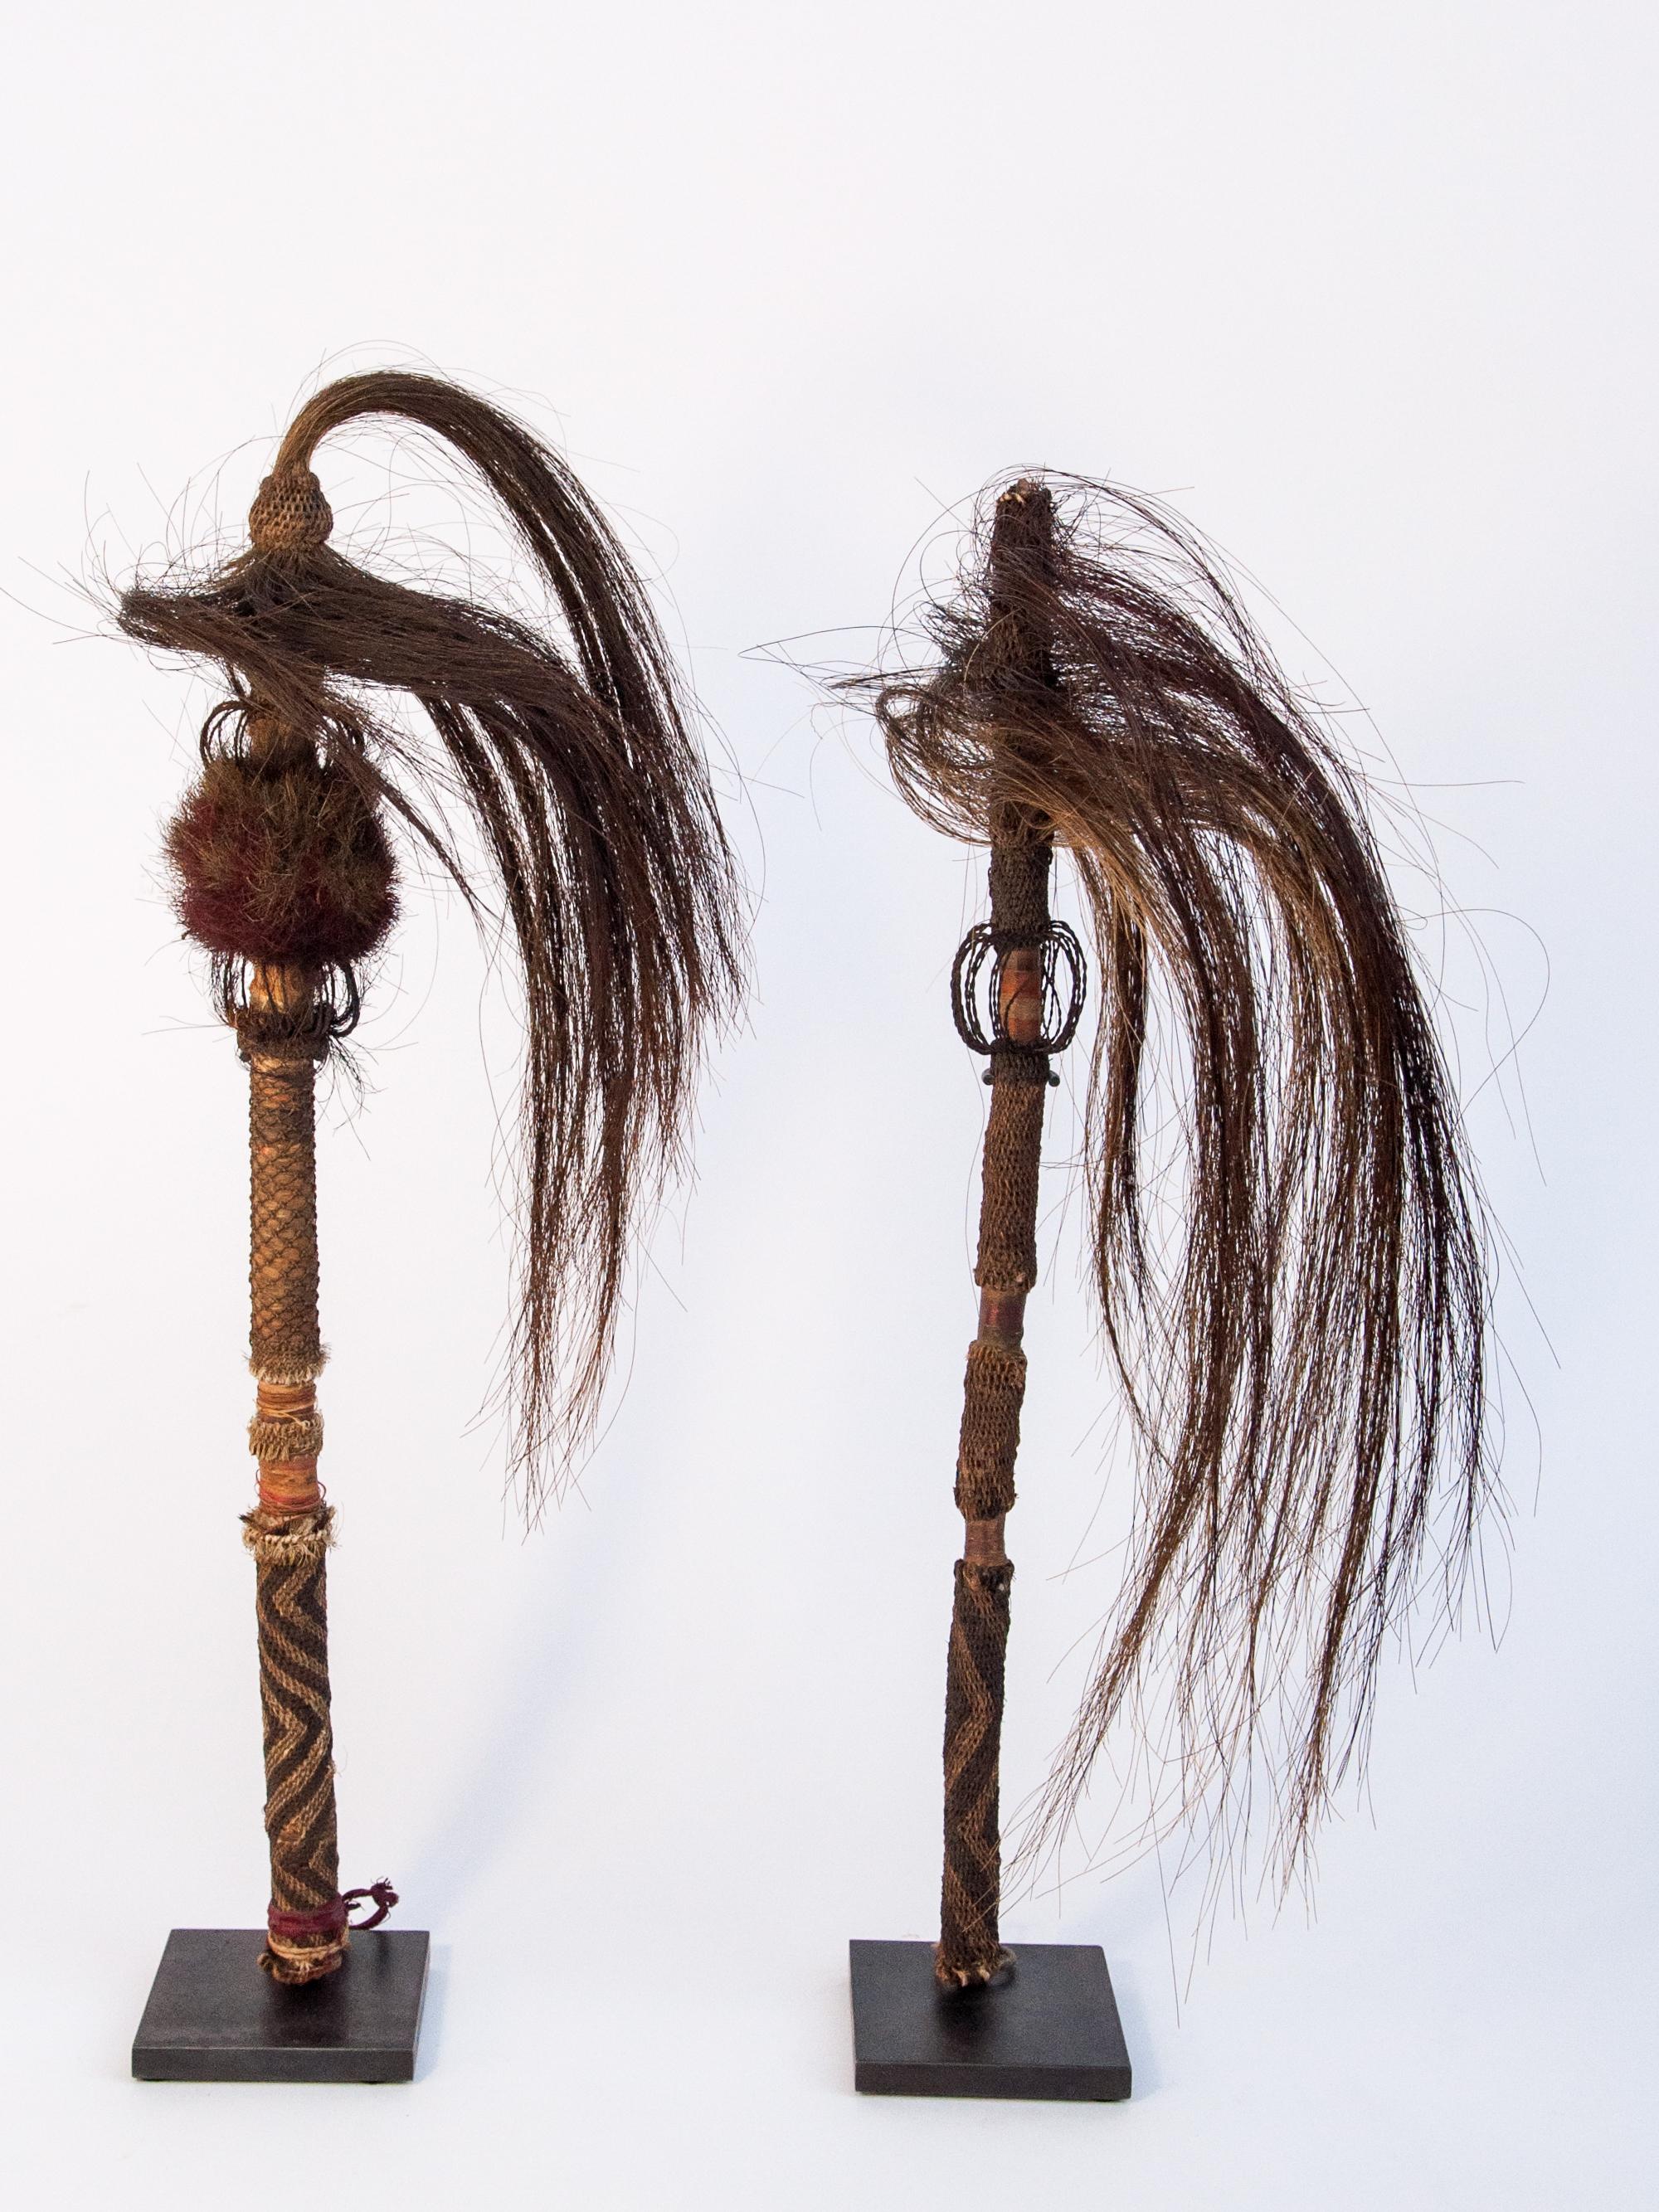 Pair of horsehair fly whisks. Yi of Yunnan, China, early to mid-20th century. Mounted on metal stands. Incorporating twining and braiding techniques.
Dimensions:
Left - 18 inches tall by approx 6.5 inches wide by 5.5 inches deep. The plate is